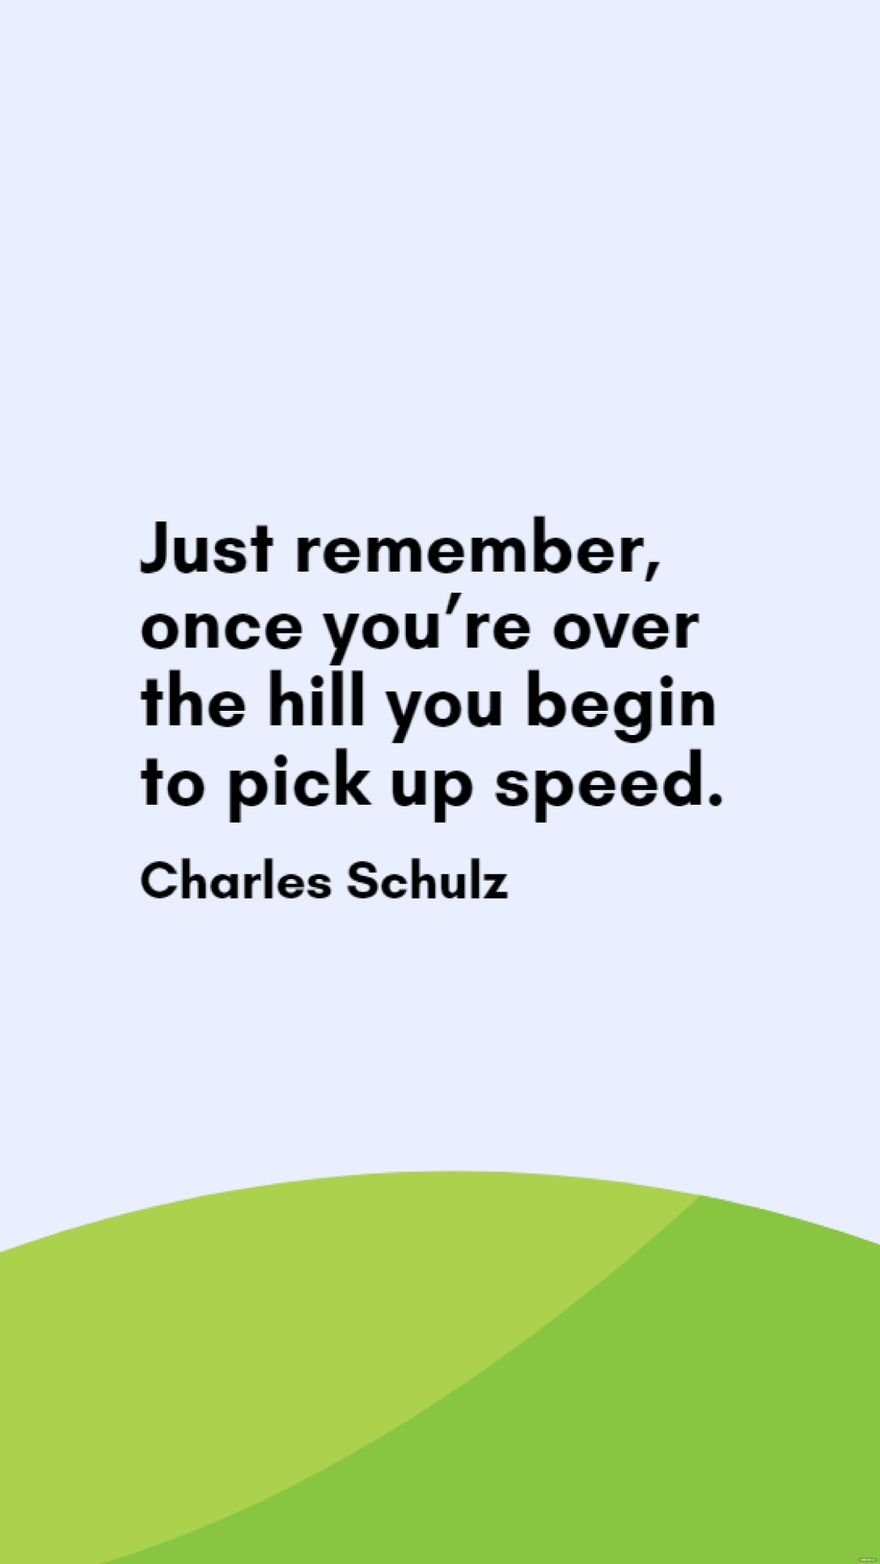 https://images.template.net/105693/charles-schulz---just-remember--once-you-re-over-the-hill-you-begin-to-pick-up-speed--0ioe0.jpg